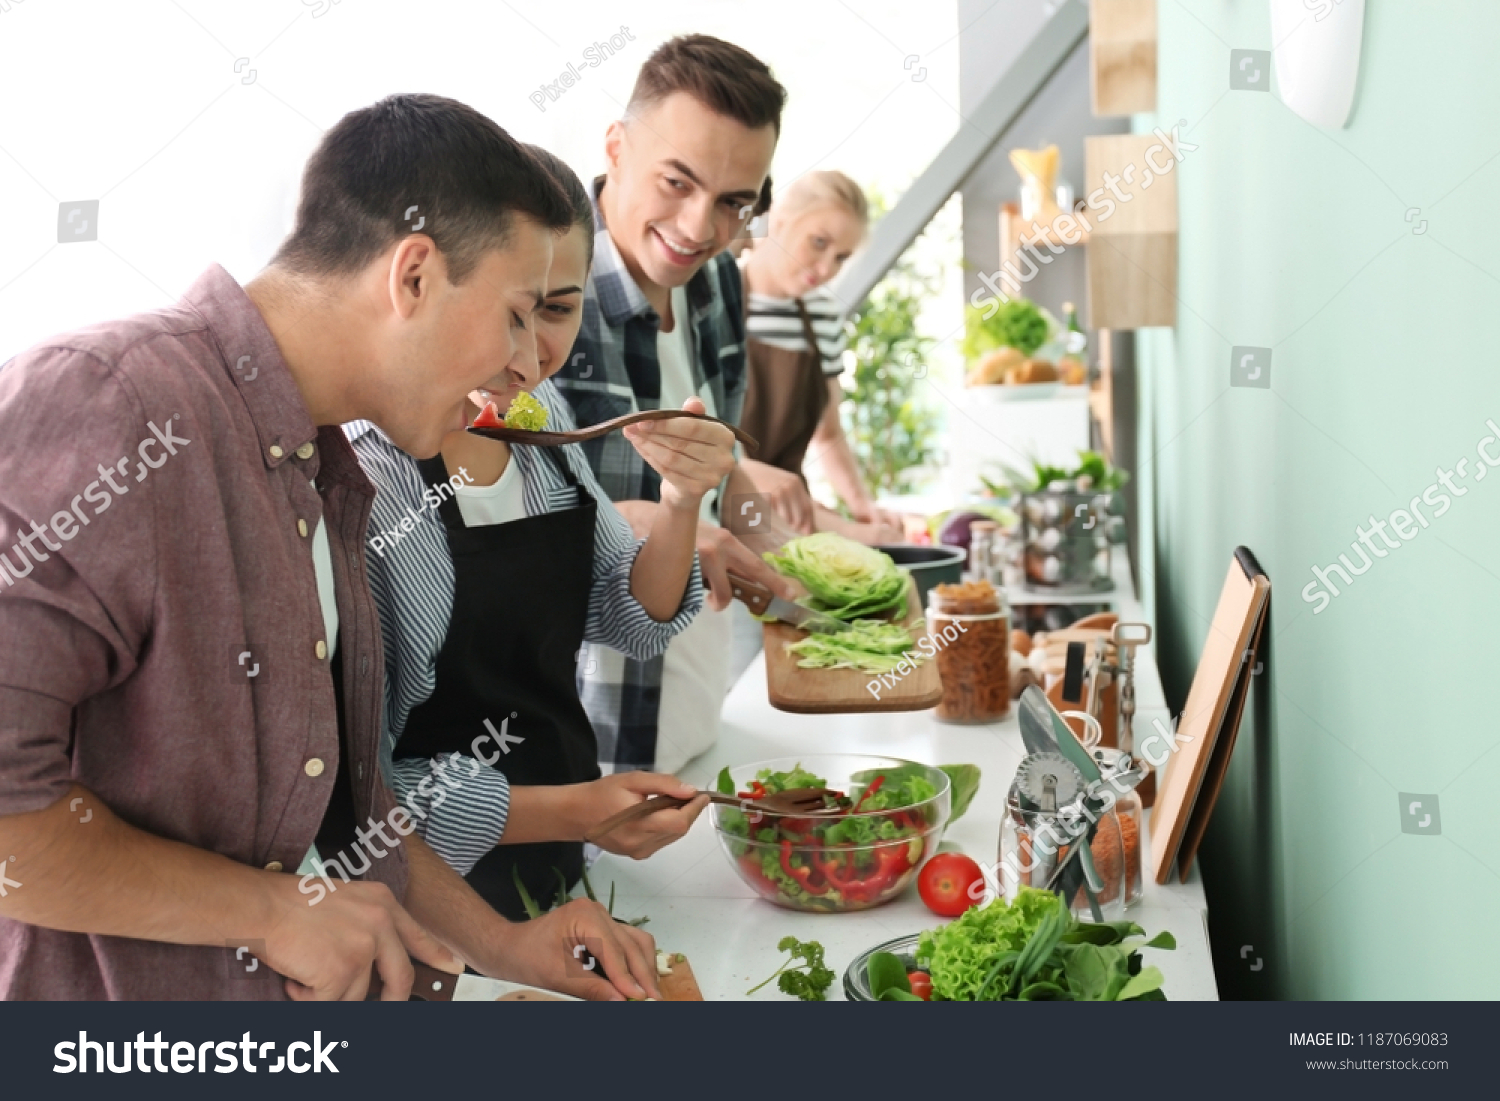 Friends cooking together in kitchen #1187069083